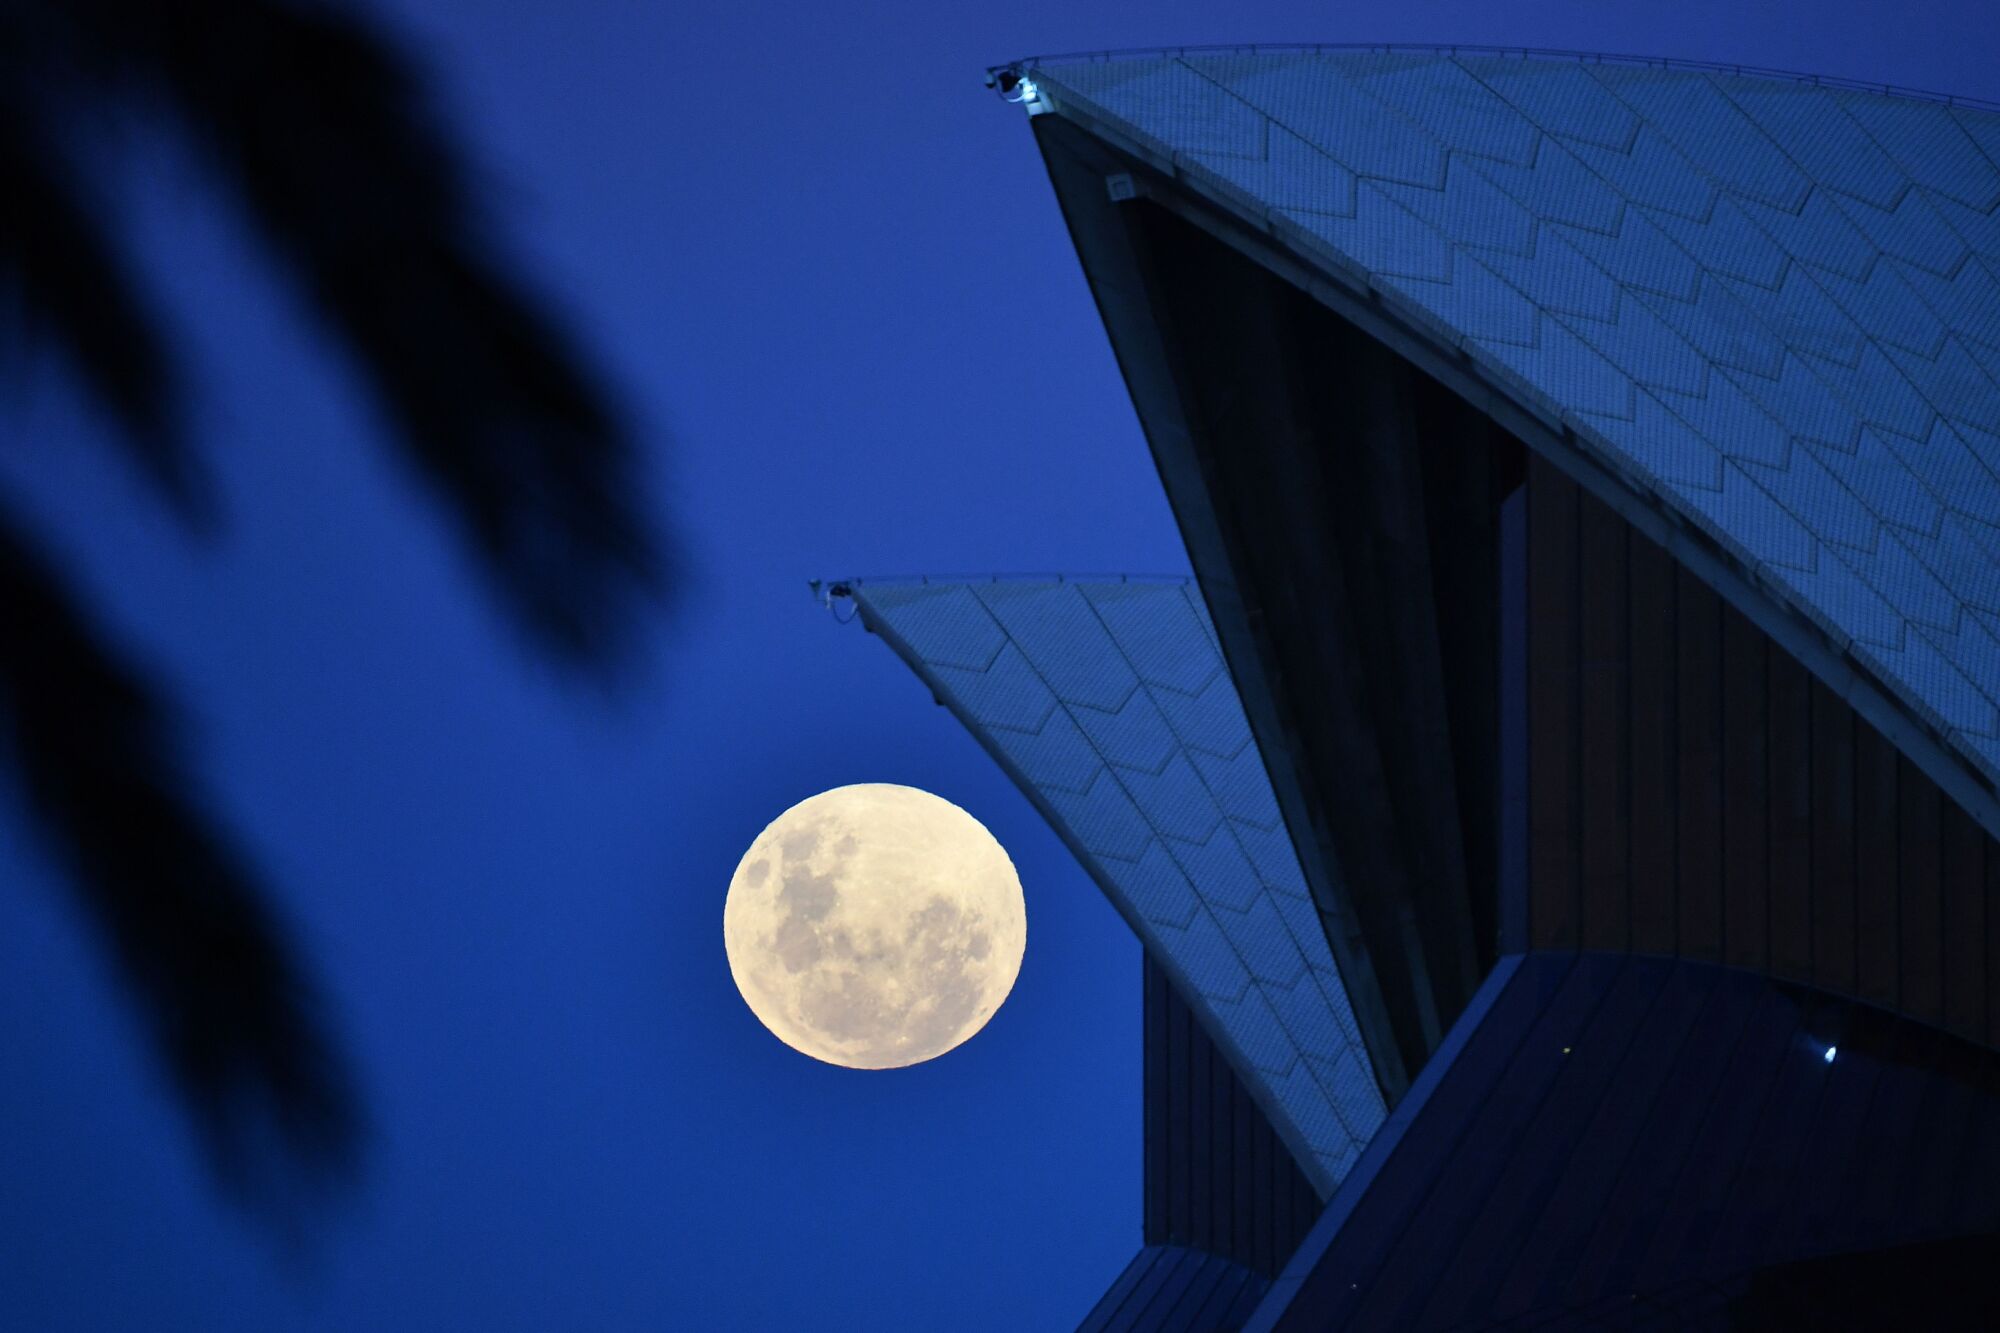 The full moon rises over the Sydney Opera House